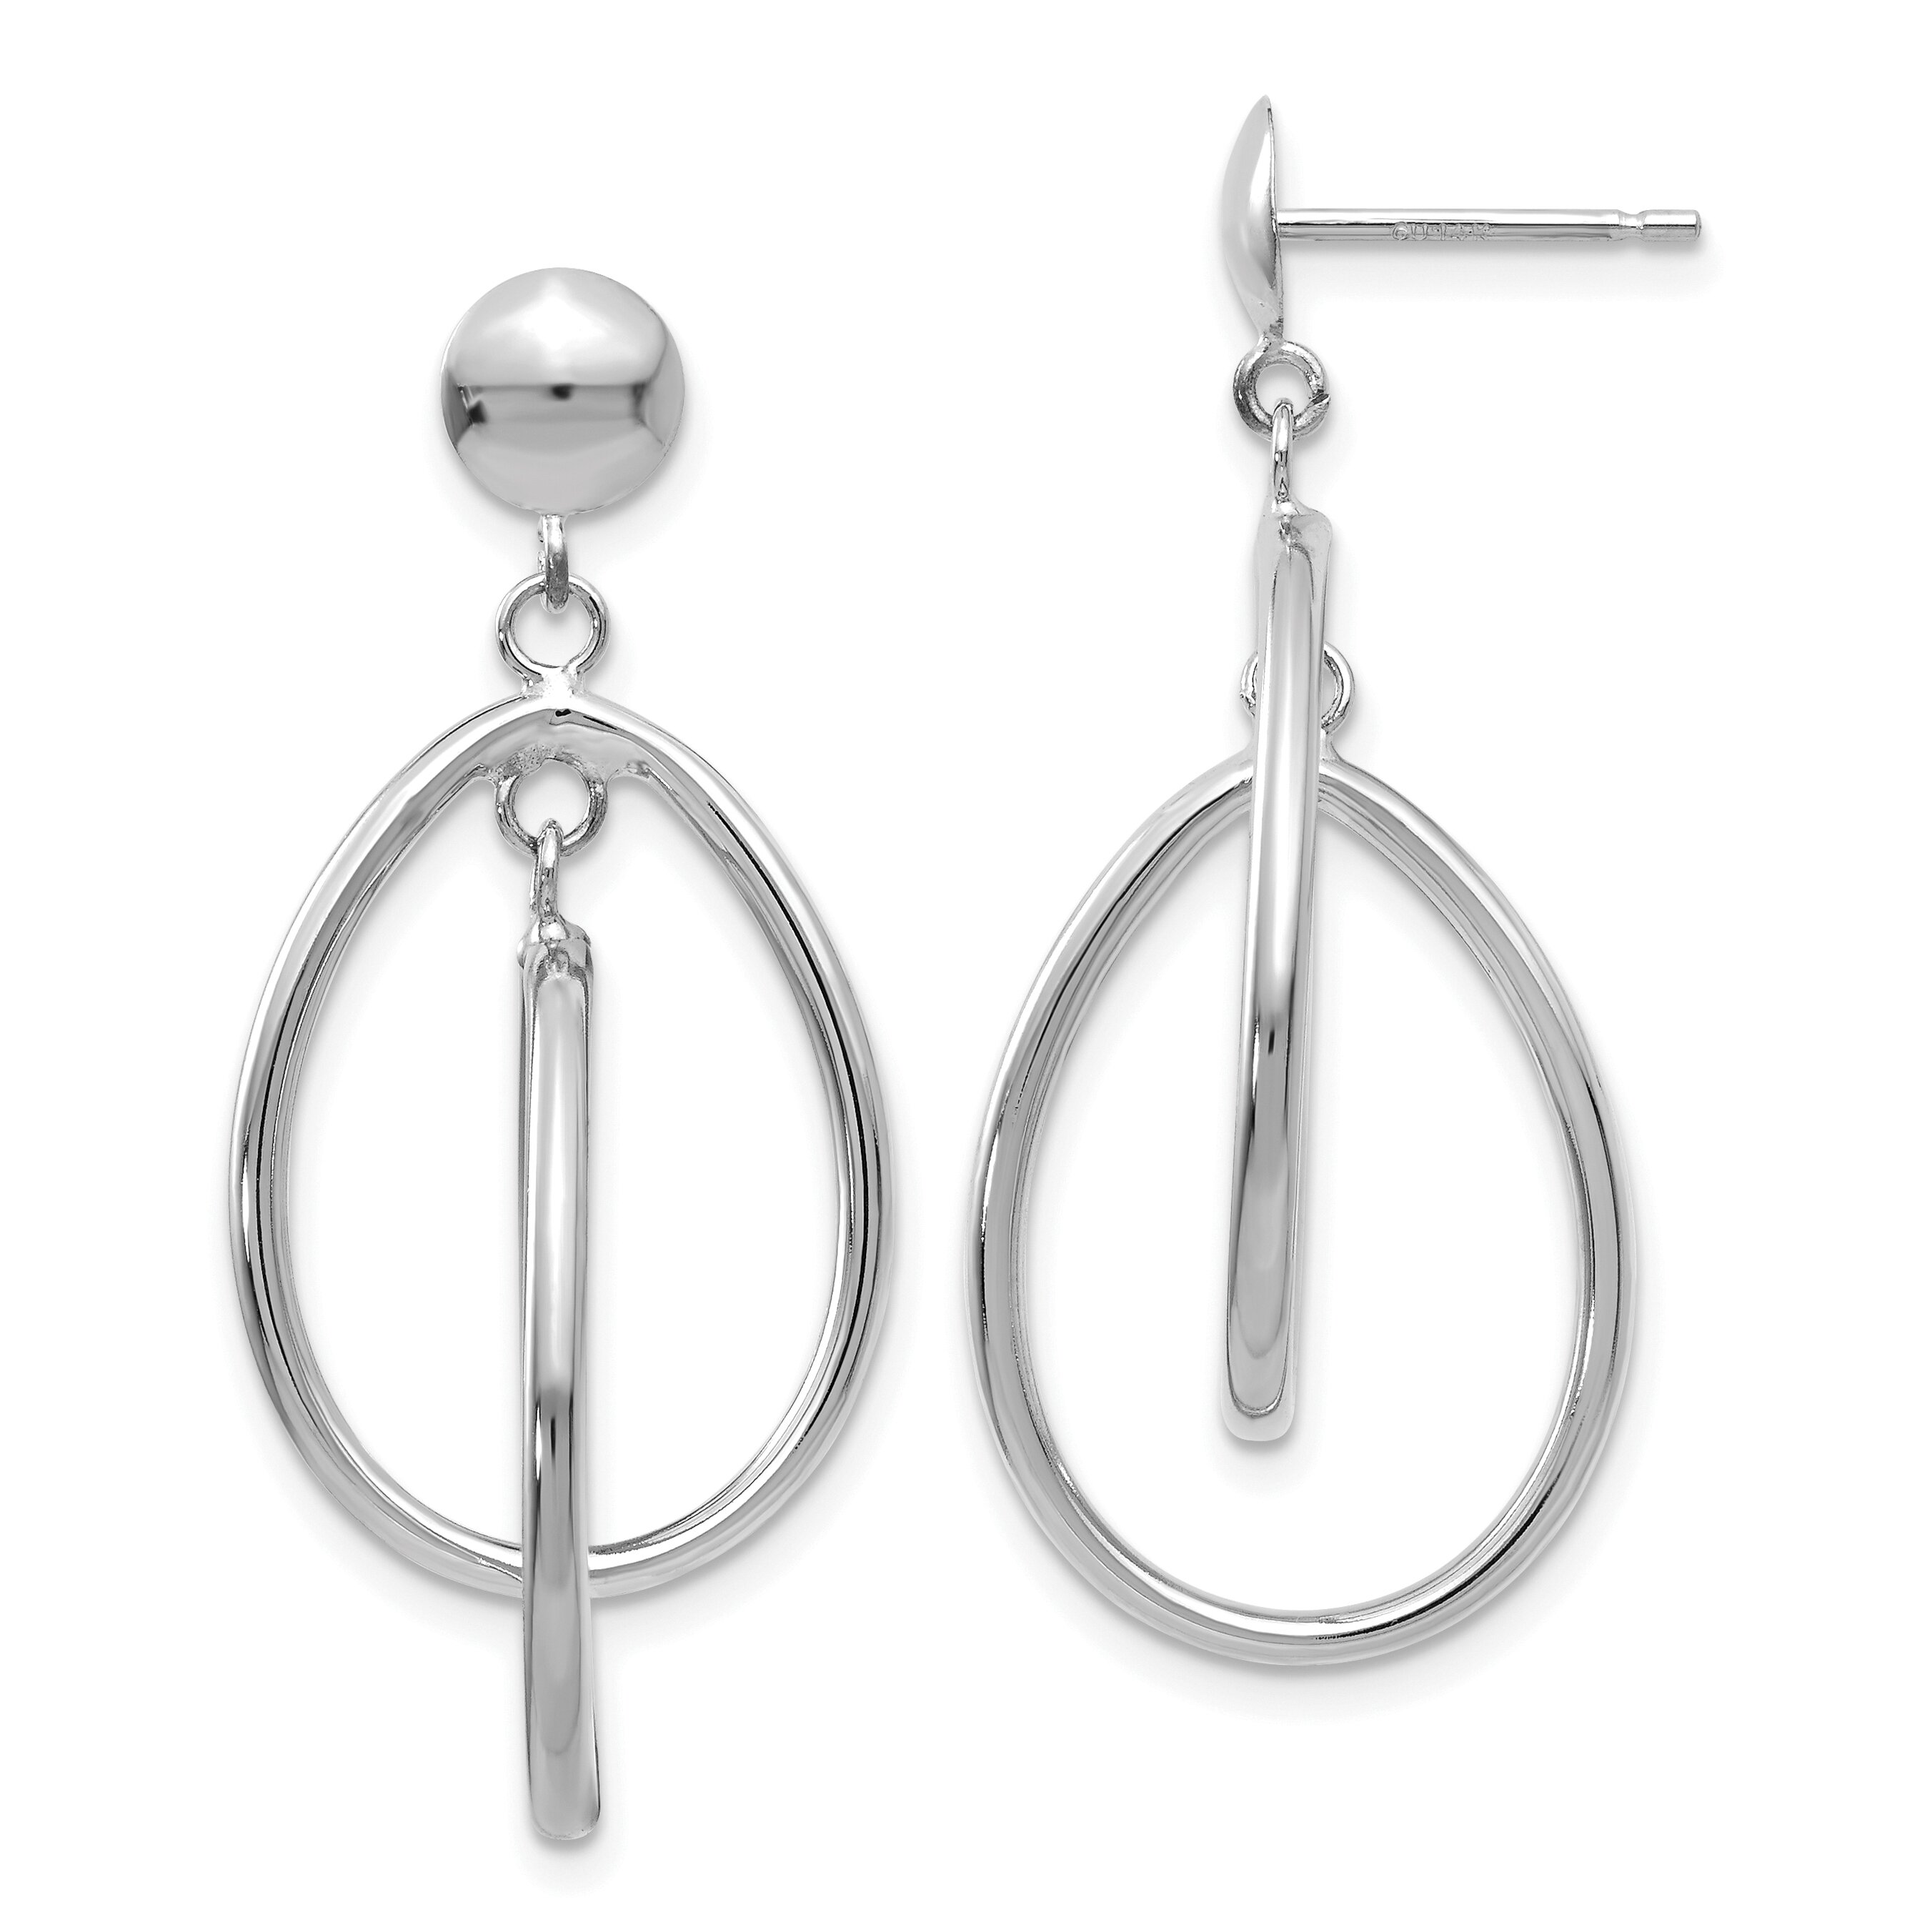 Findingking 14K White Gold Oval Dangle Earrings Polished Jewelry